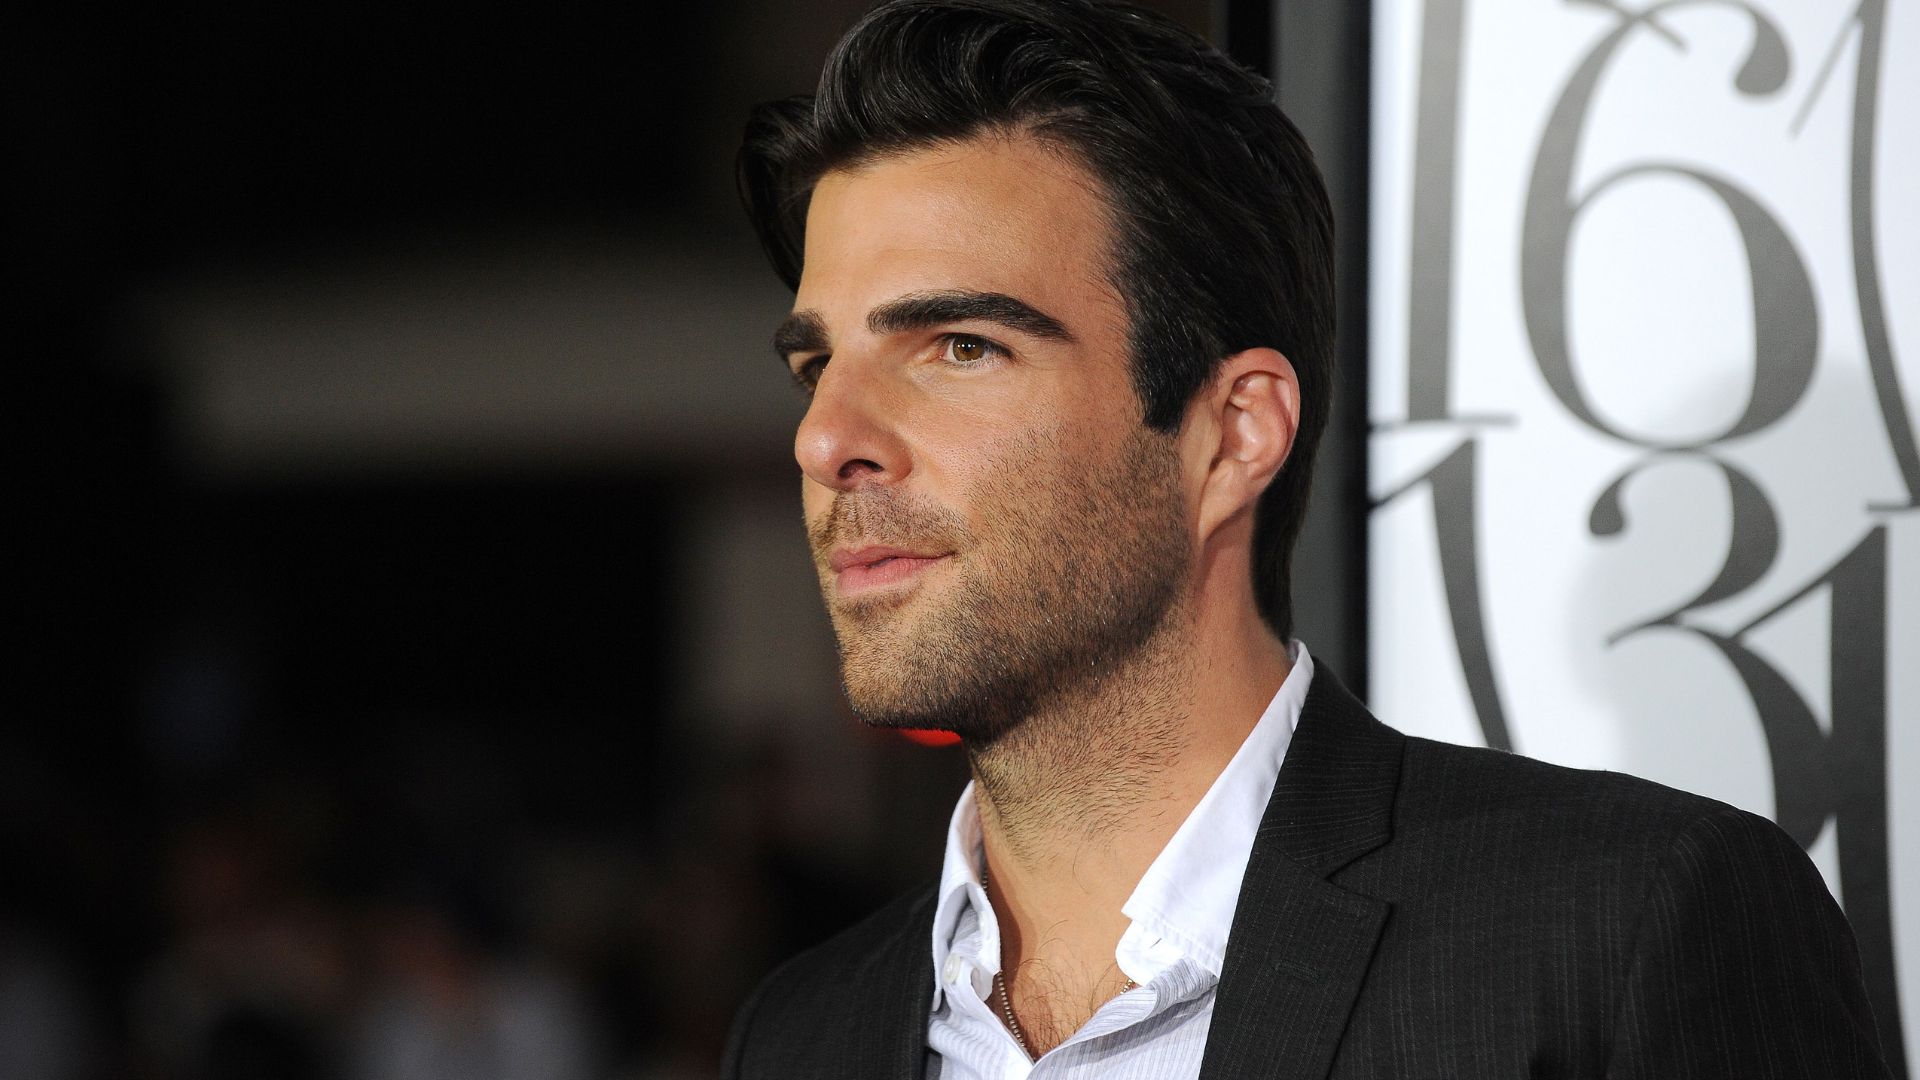 Zachary Quinto Wearing A Black And White Suit